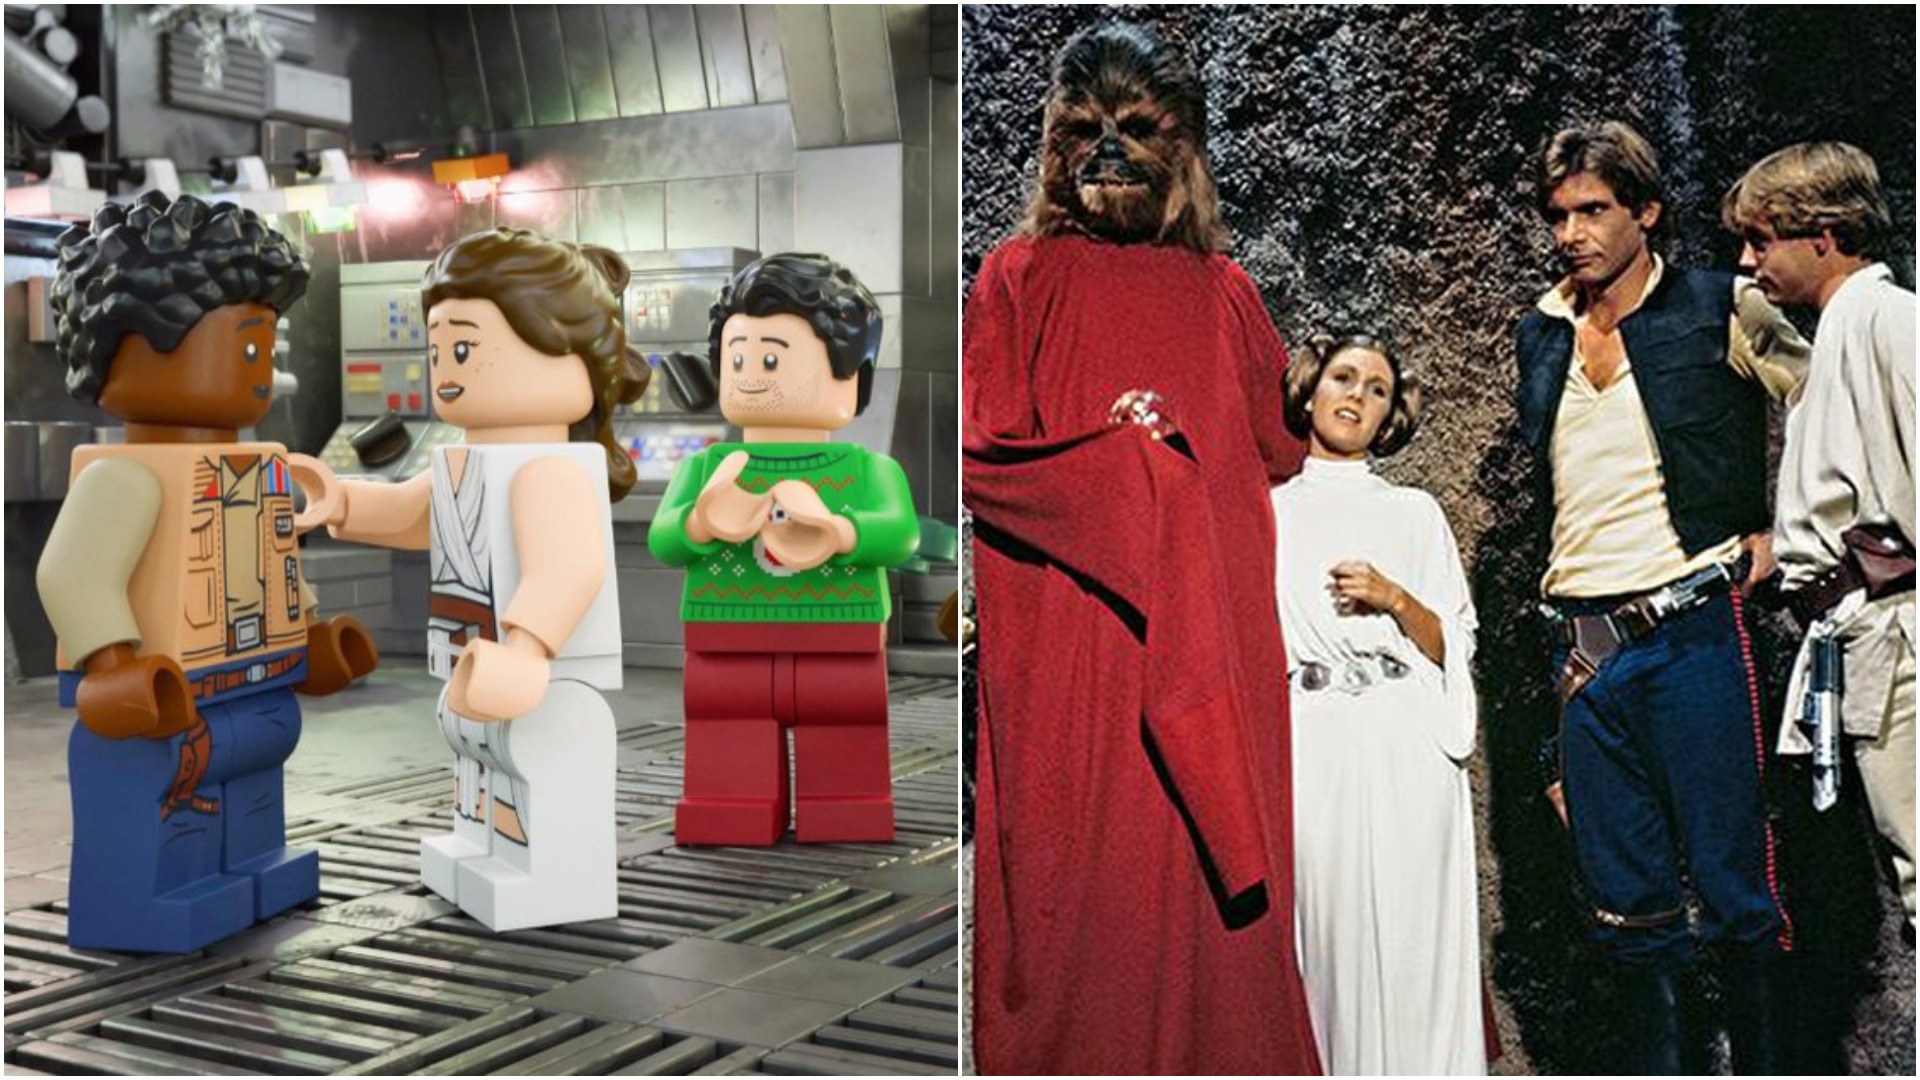 Lego Star Wars Holiday Special Is Everything Star Wars Doesn't Need